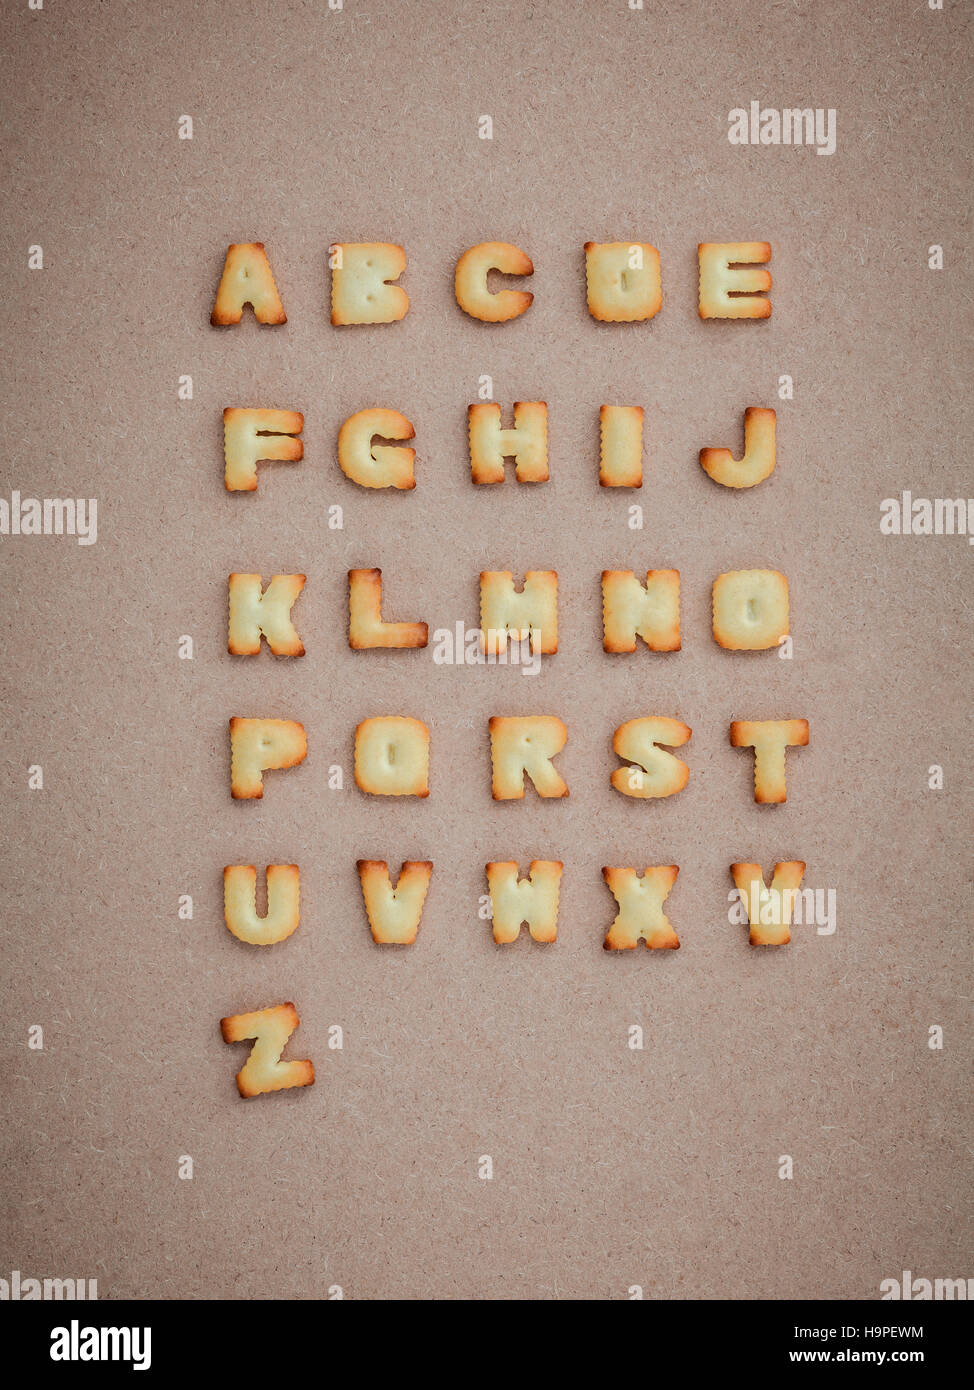 Cookies ABC in the form of alphabet A-Z on brown cardboard backg Stock Photo